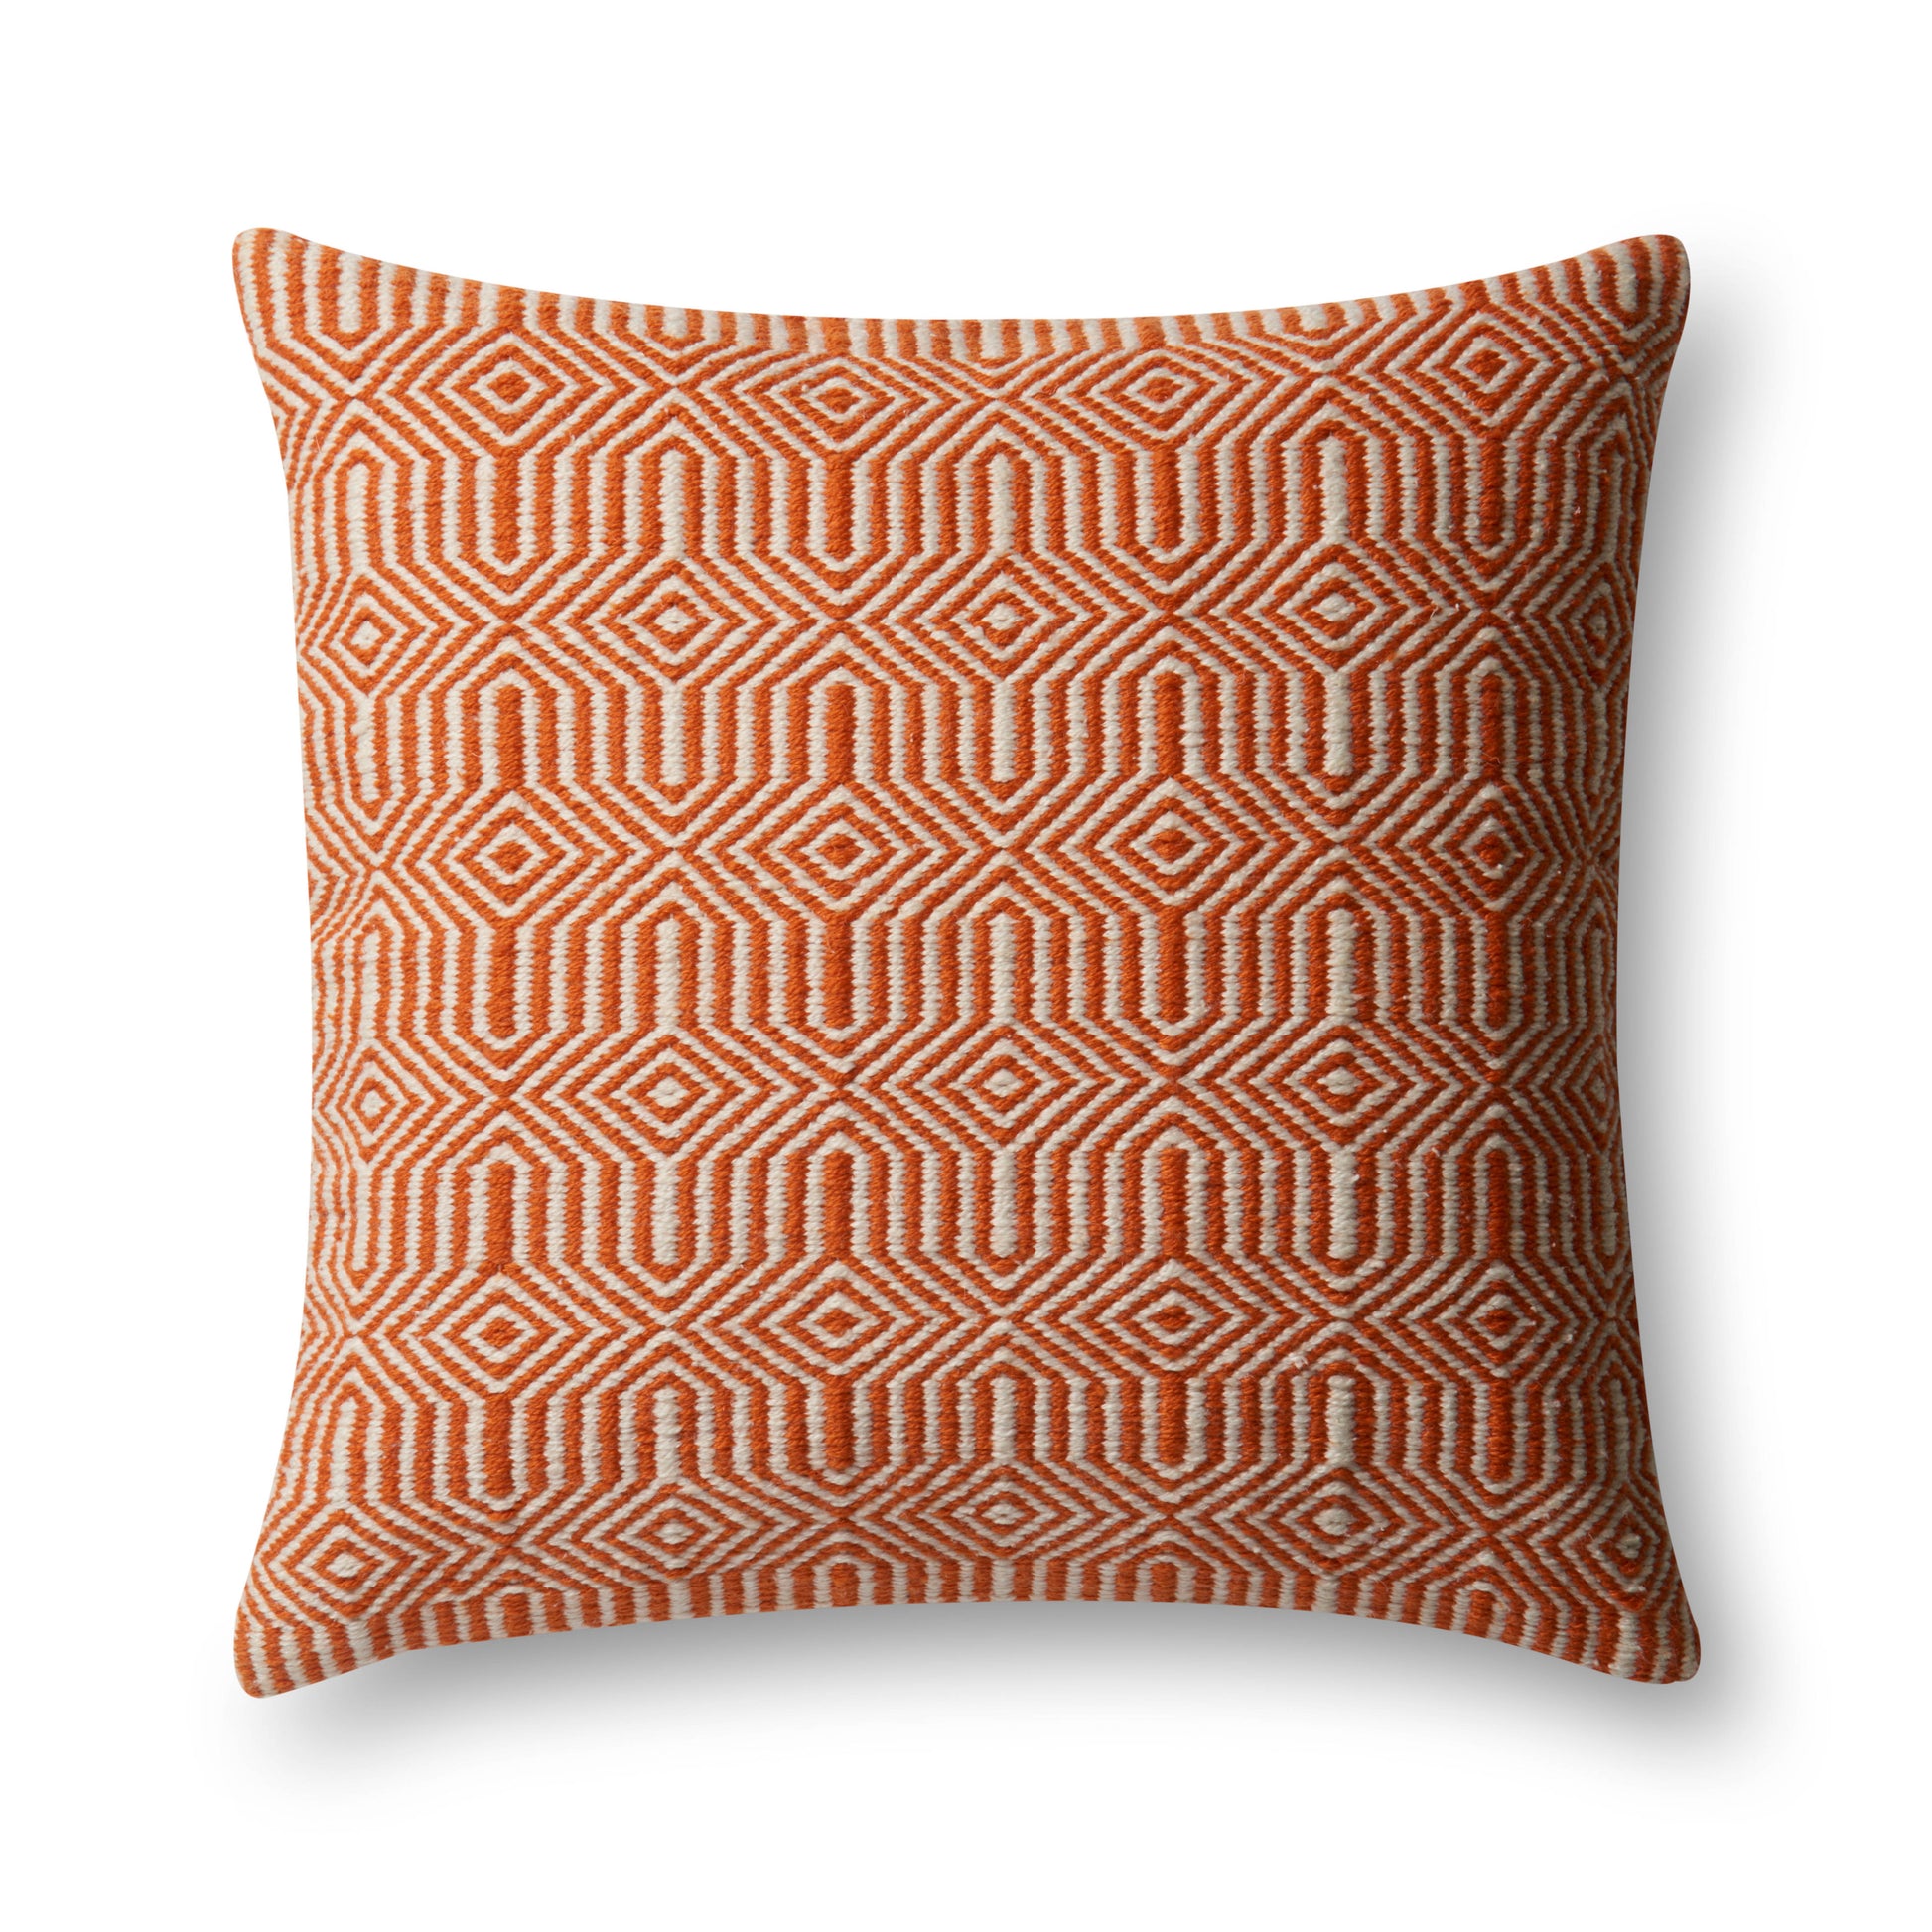 Photo of a pillow;  P0339 Orange / Ivory 22" x 22" Cover w/Poly Pillow